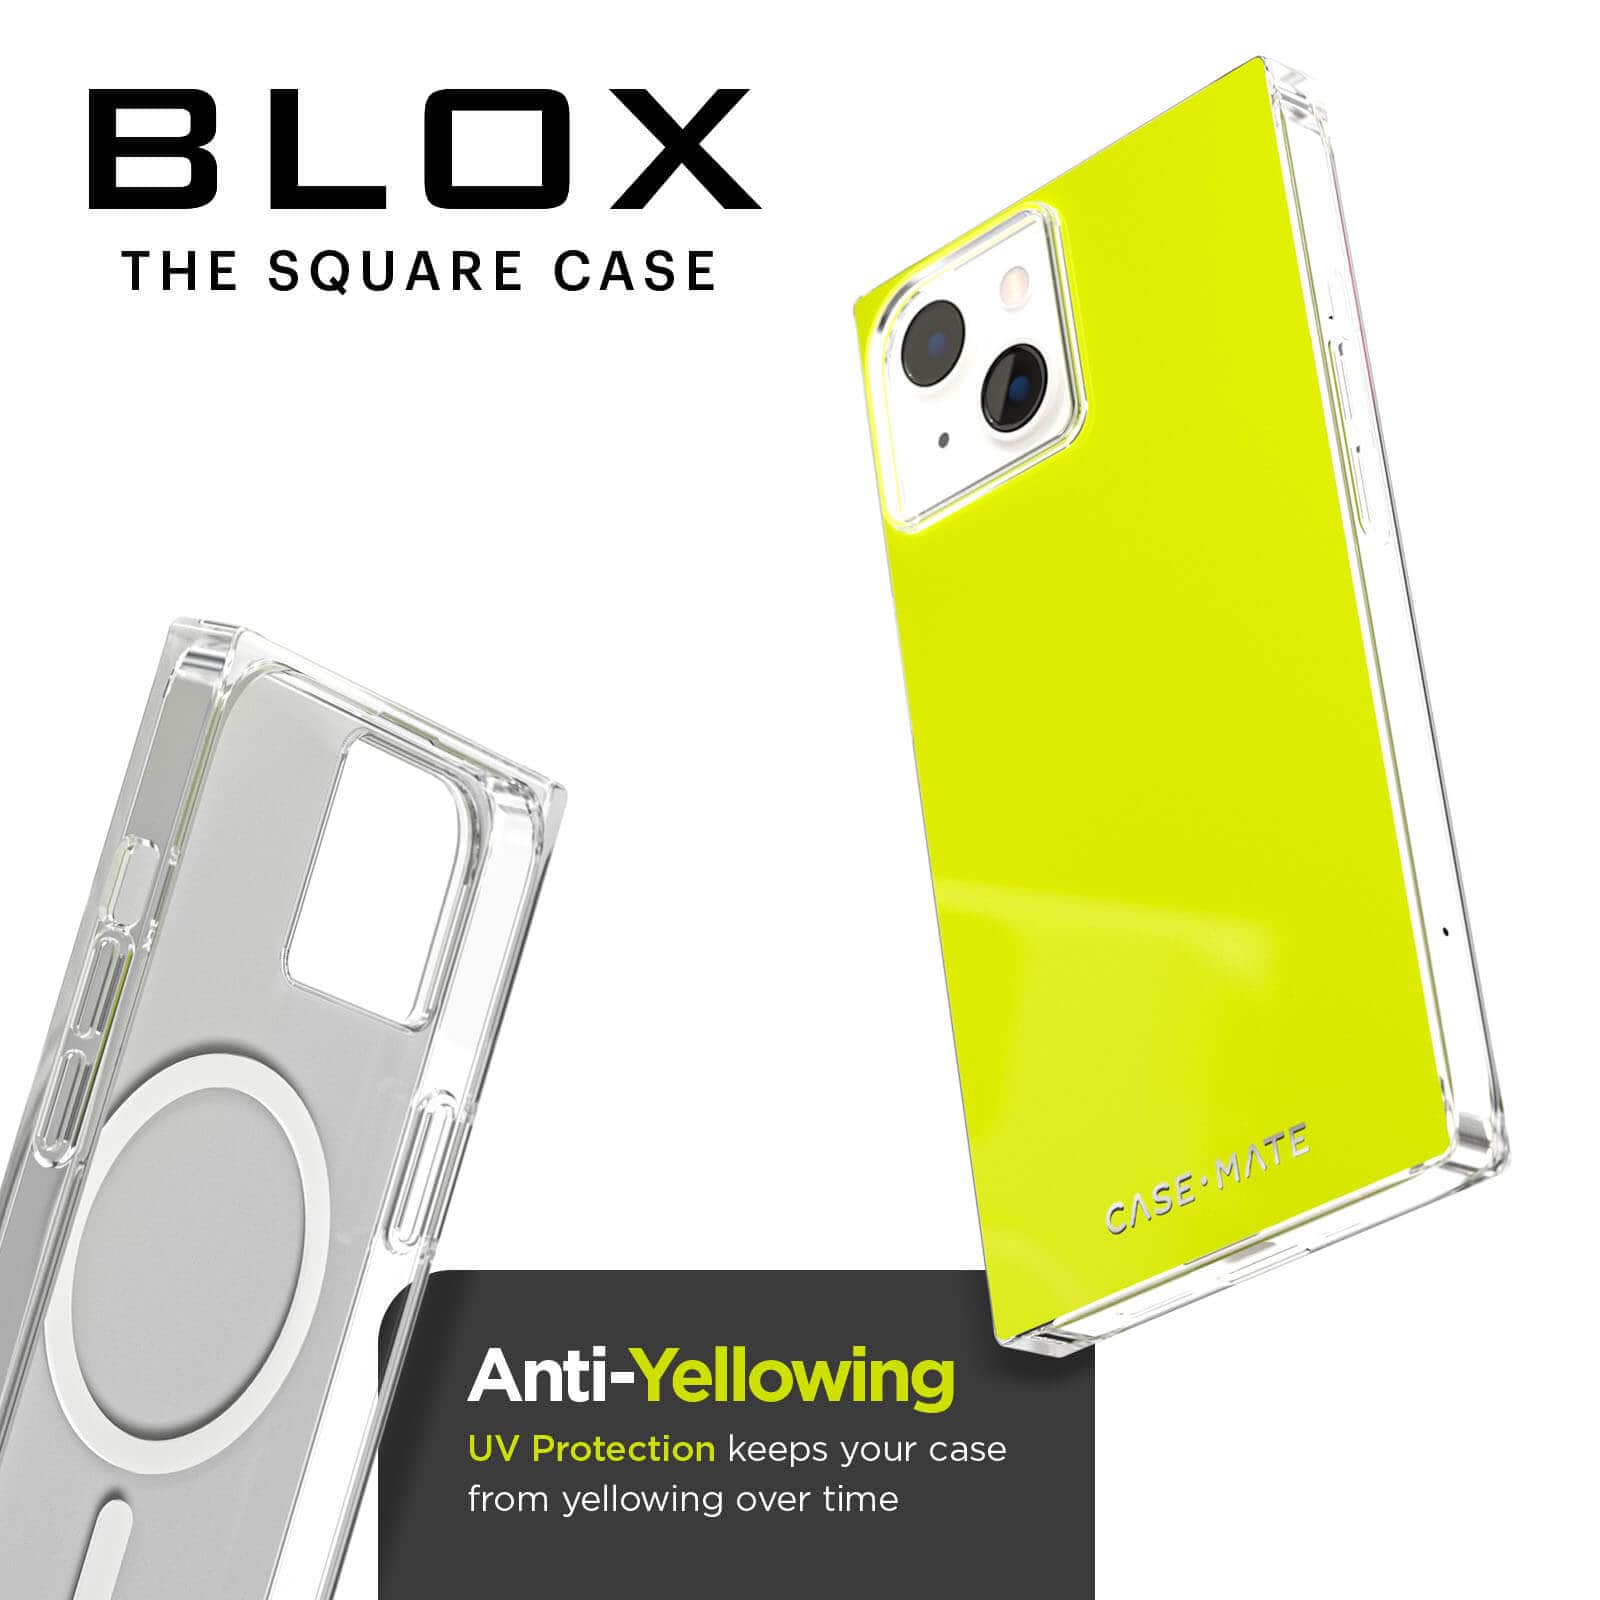 BLOX The Square Case. Anti-yellowing UV protection keeps your case from yellowing over time. color::Neon Yellow